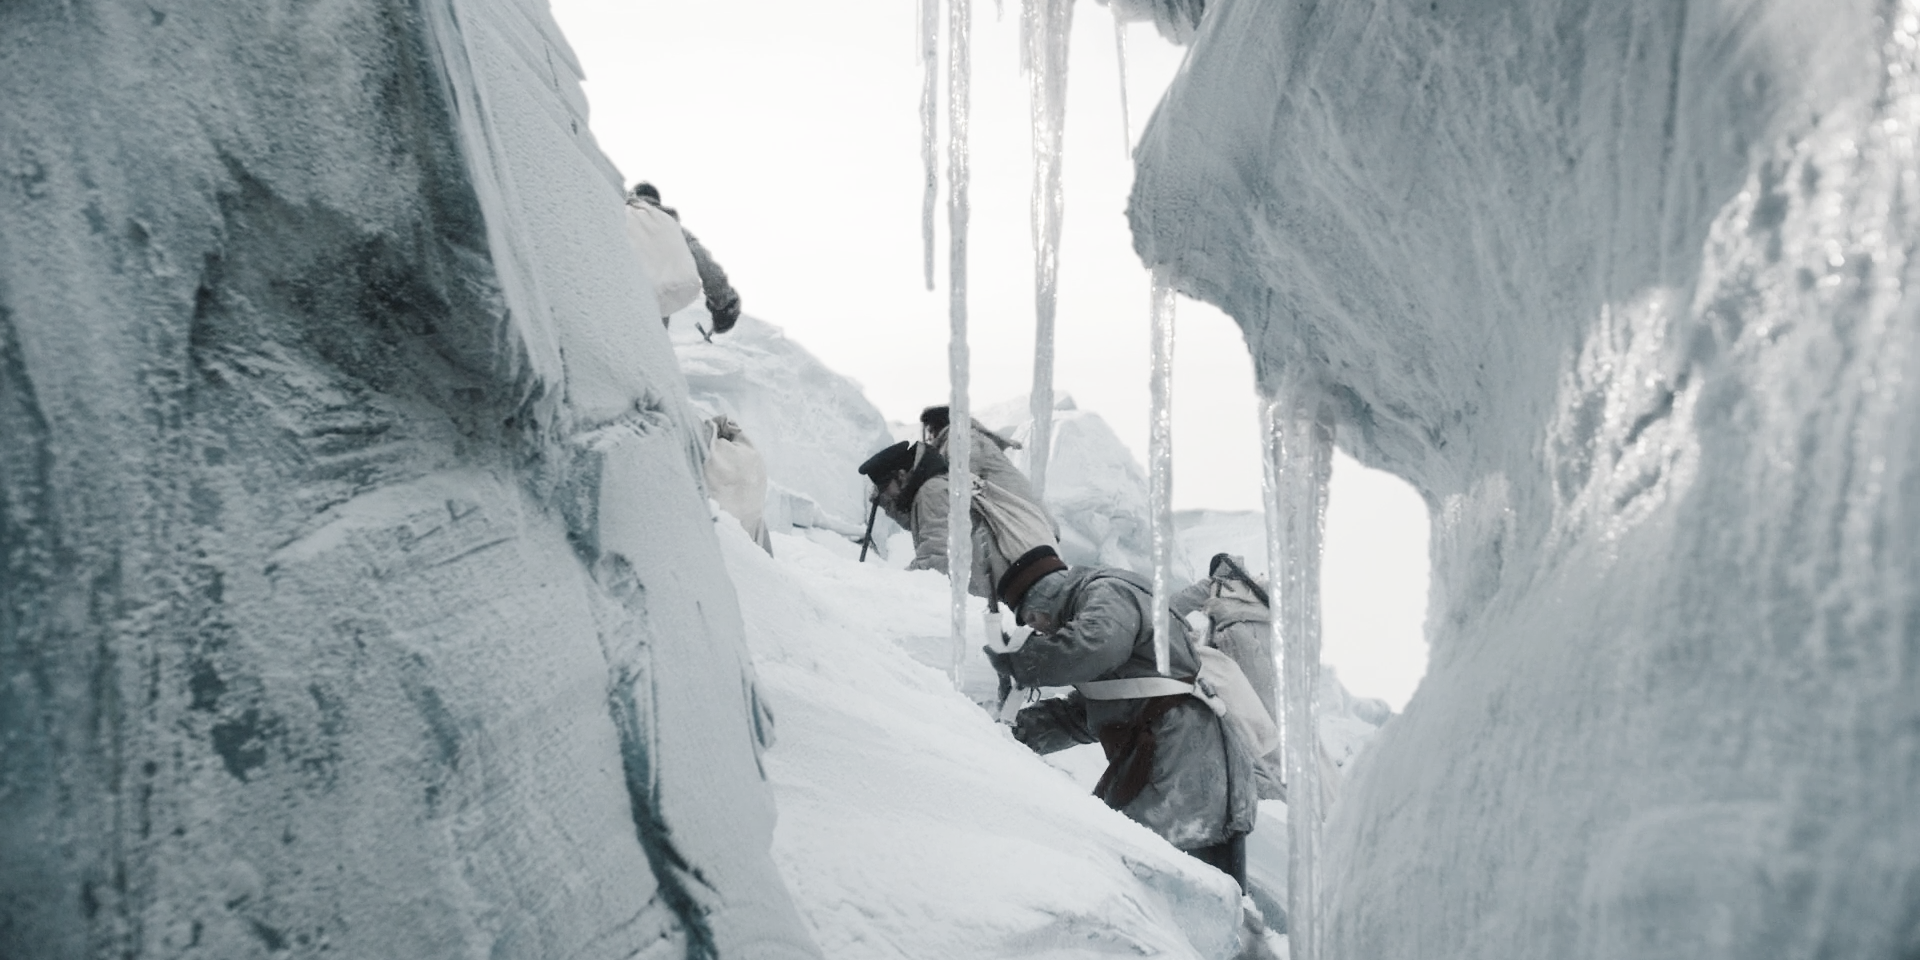 People climbing up the side of a wall of ice